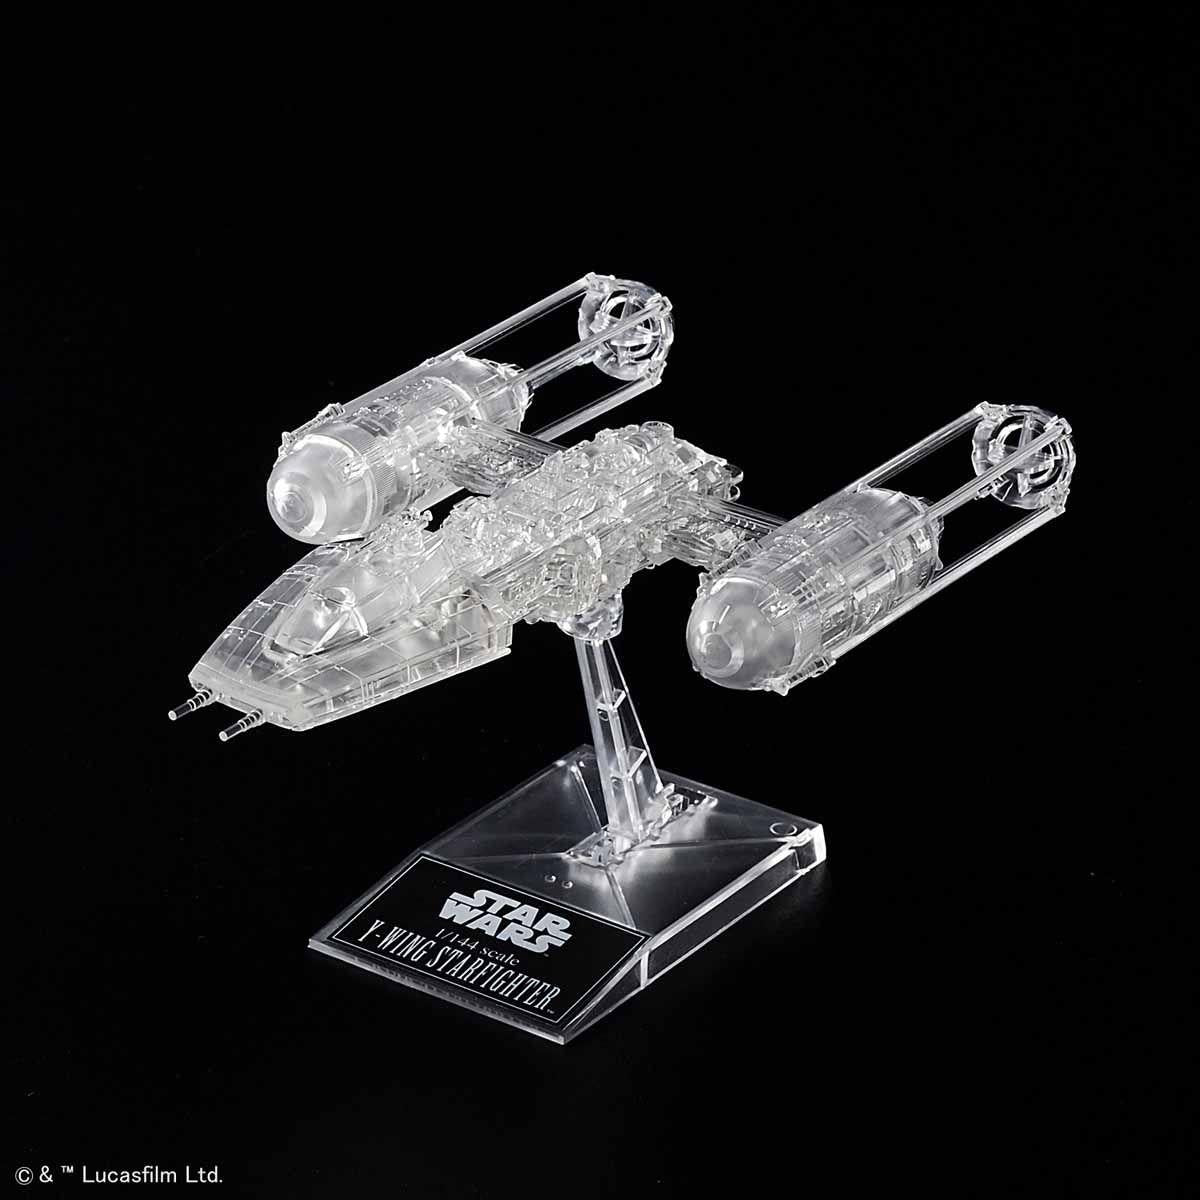 Star Wars: Return of the Jedi Clear Vehicle Set Various Scale Model